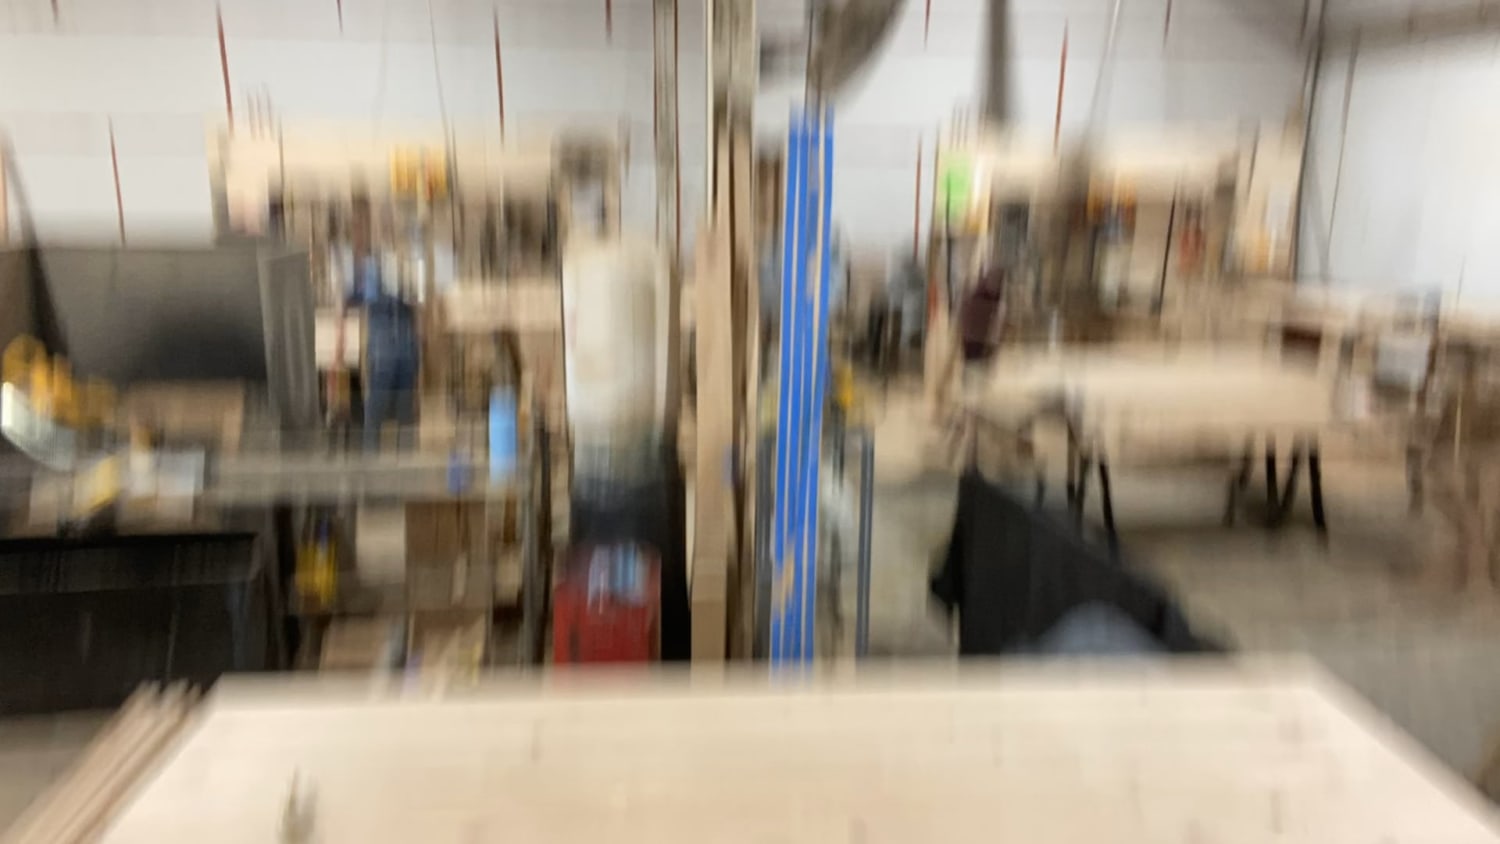 Little time lapse from a barn door I did